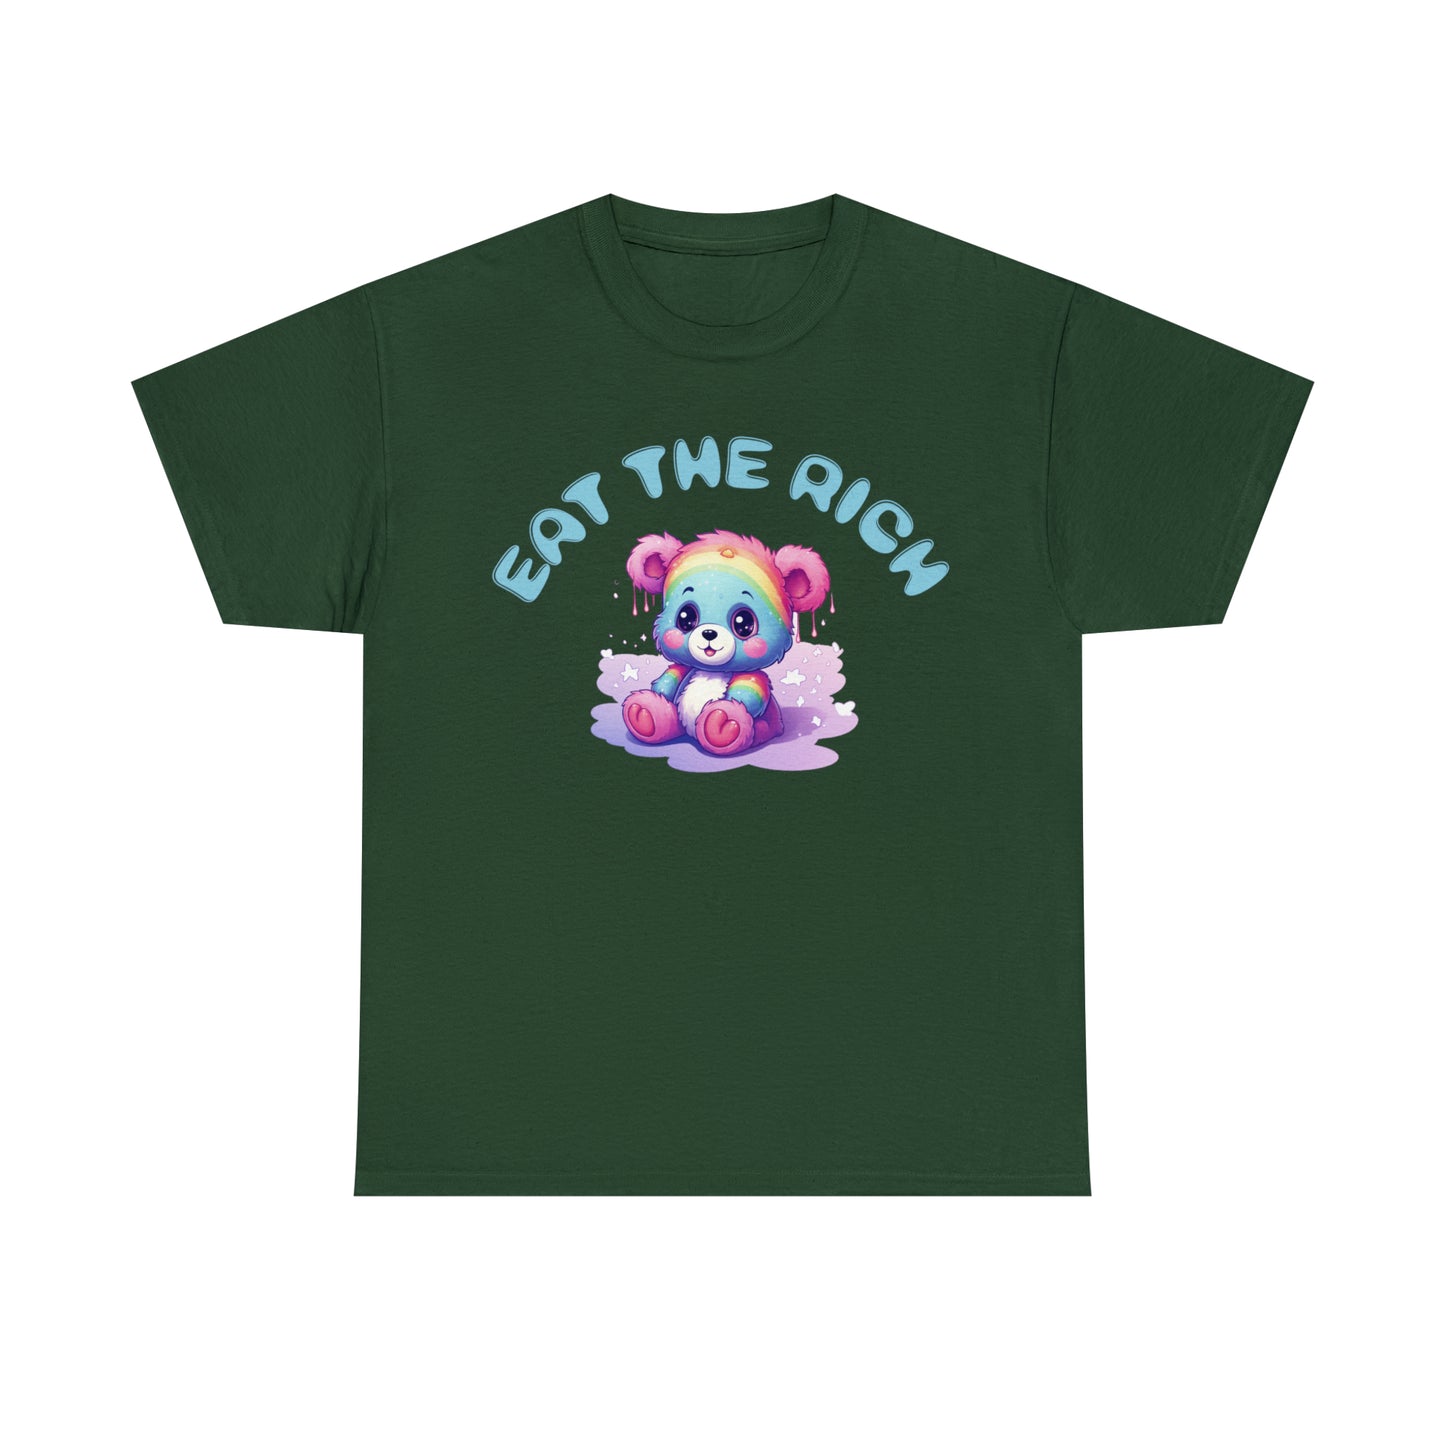 EAT THE RICH Tee, blue text